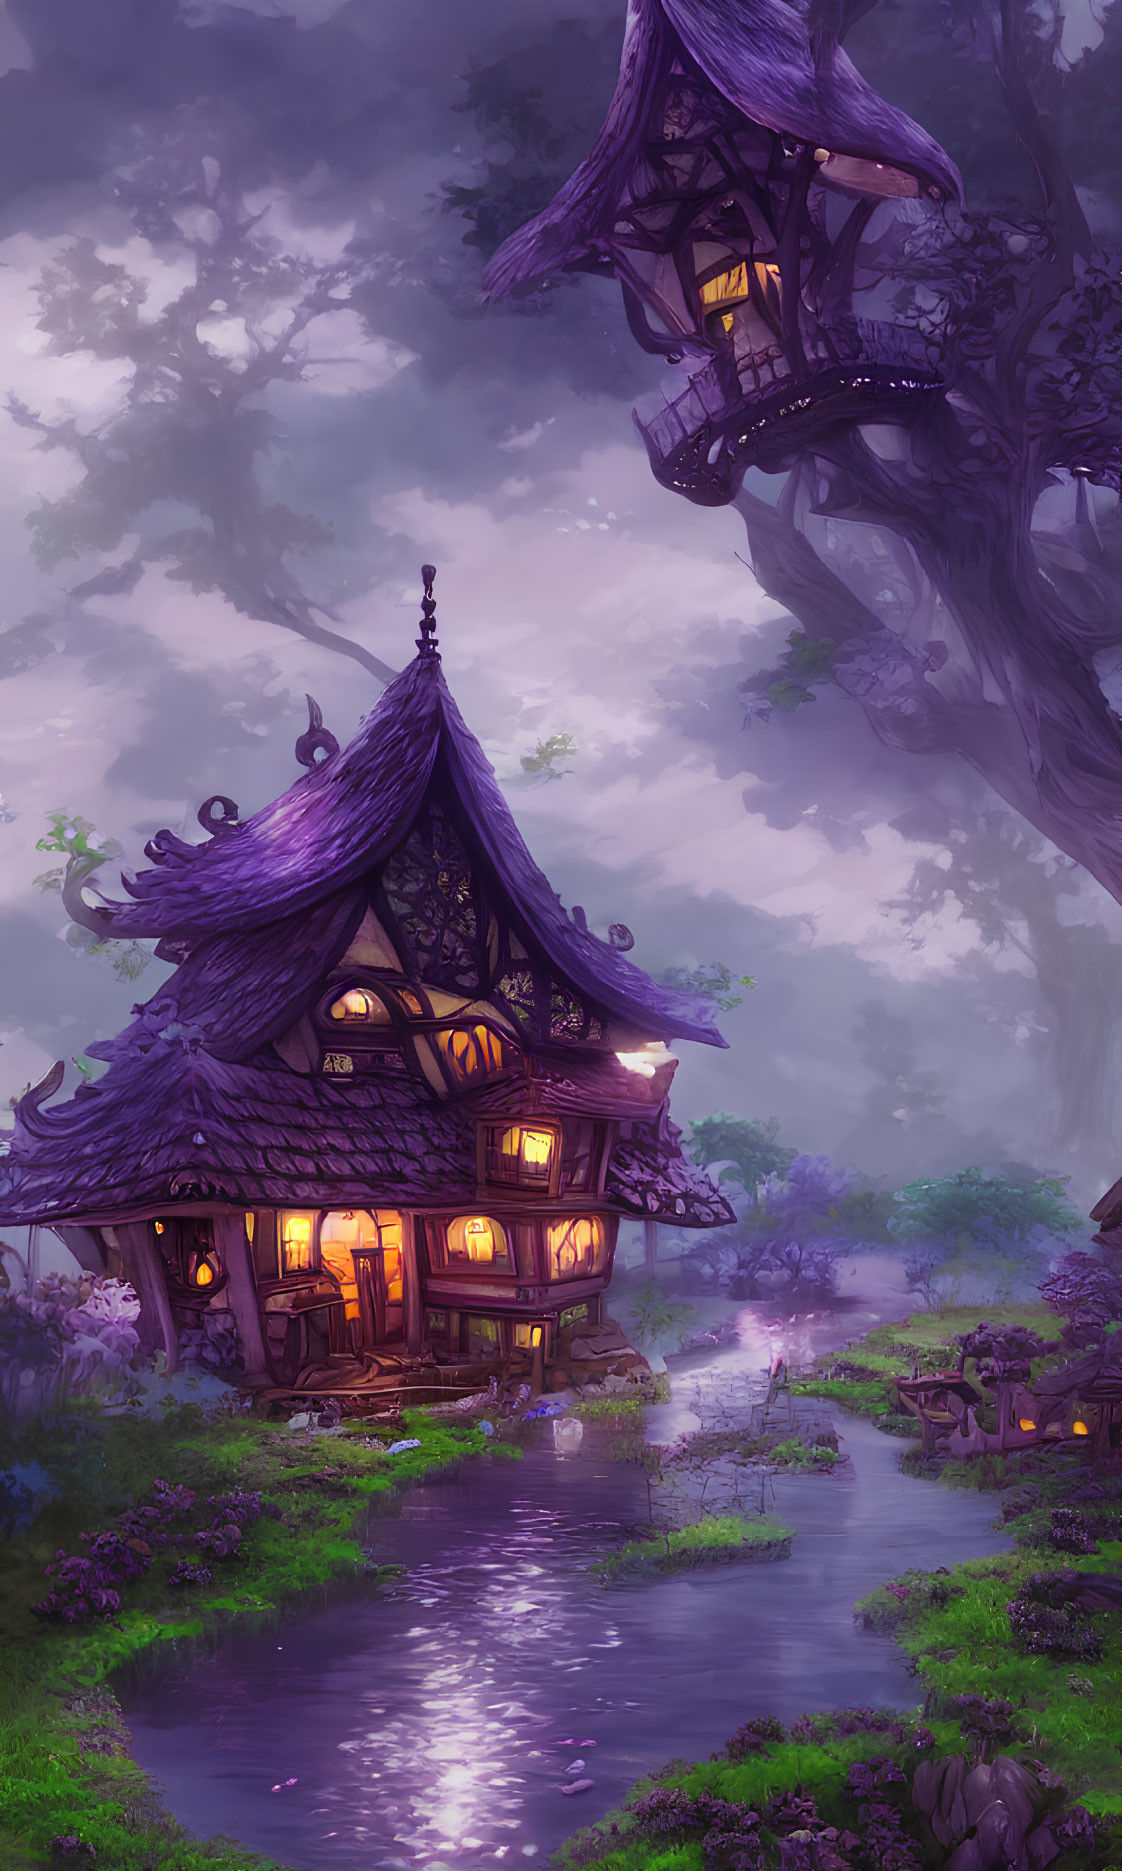 Purple-hued fantasy treehouse by tranquil stream amid mystical flora